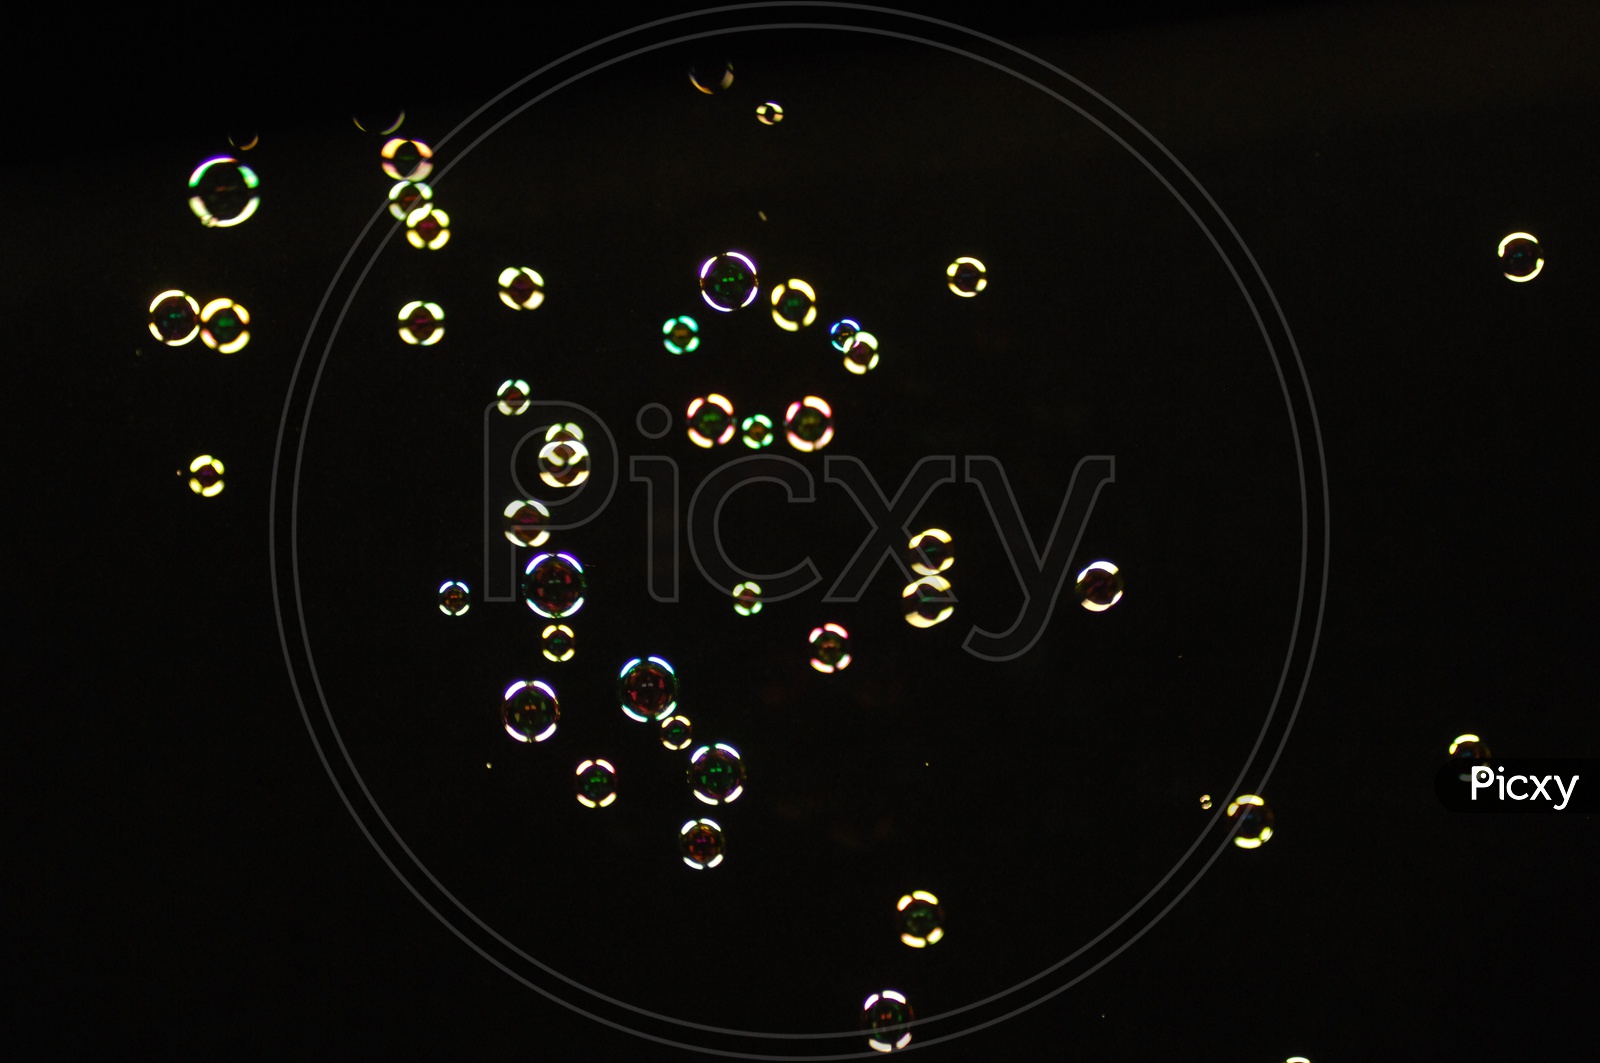 Bubbles with Black Background